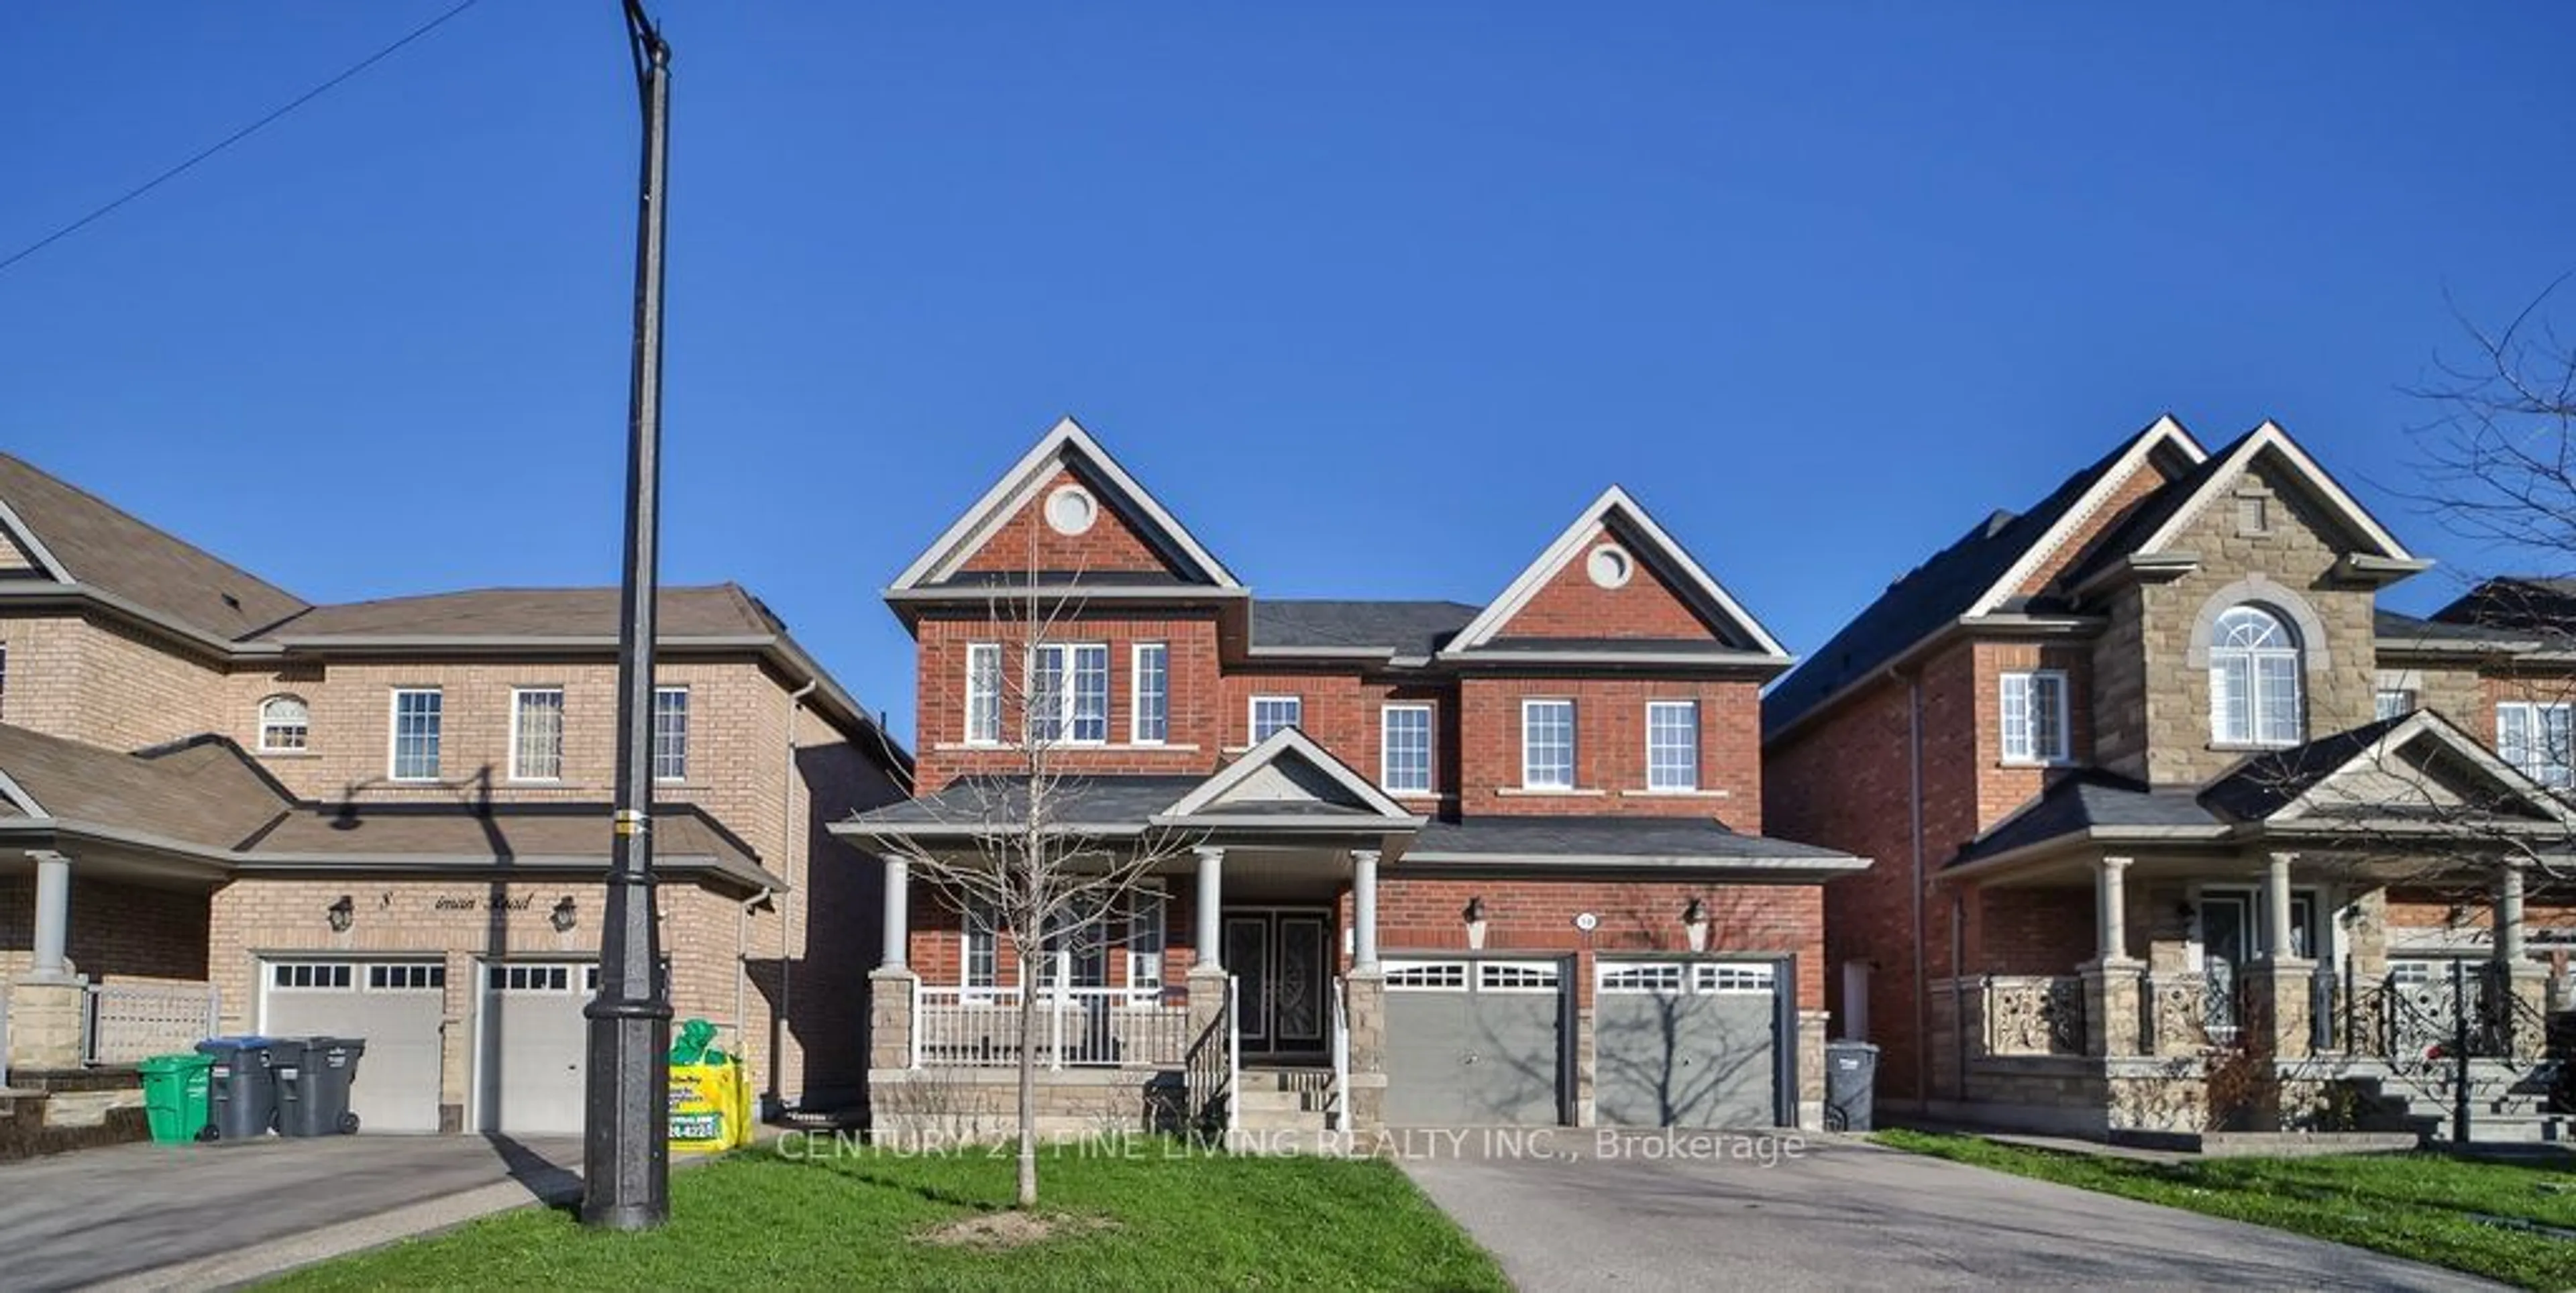 Home with brick exterior material for 10 Godliman Rd, Brampton Ontario L6X 3C2